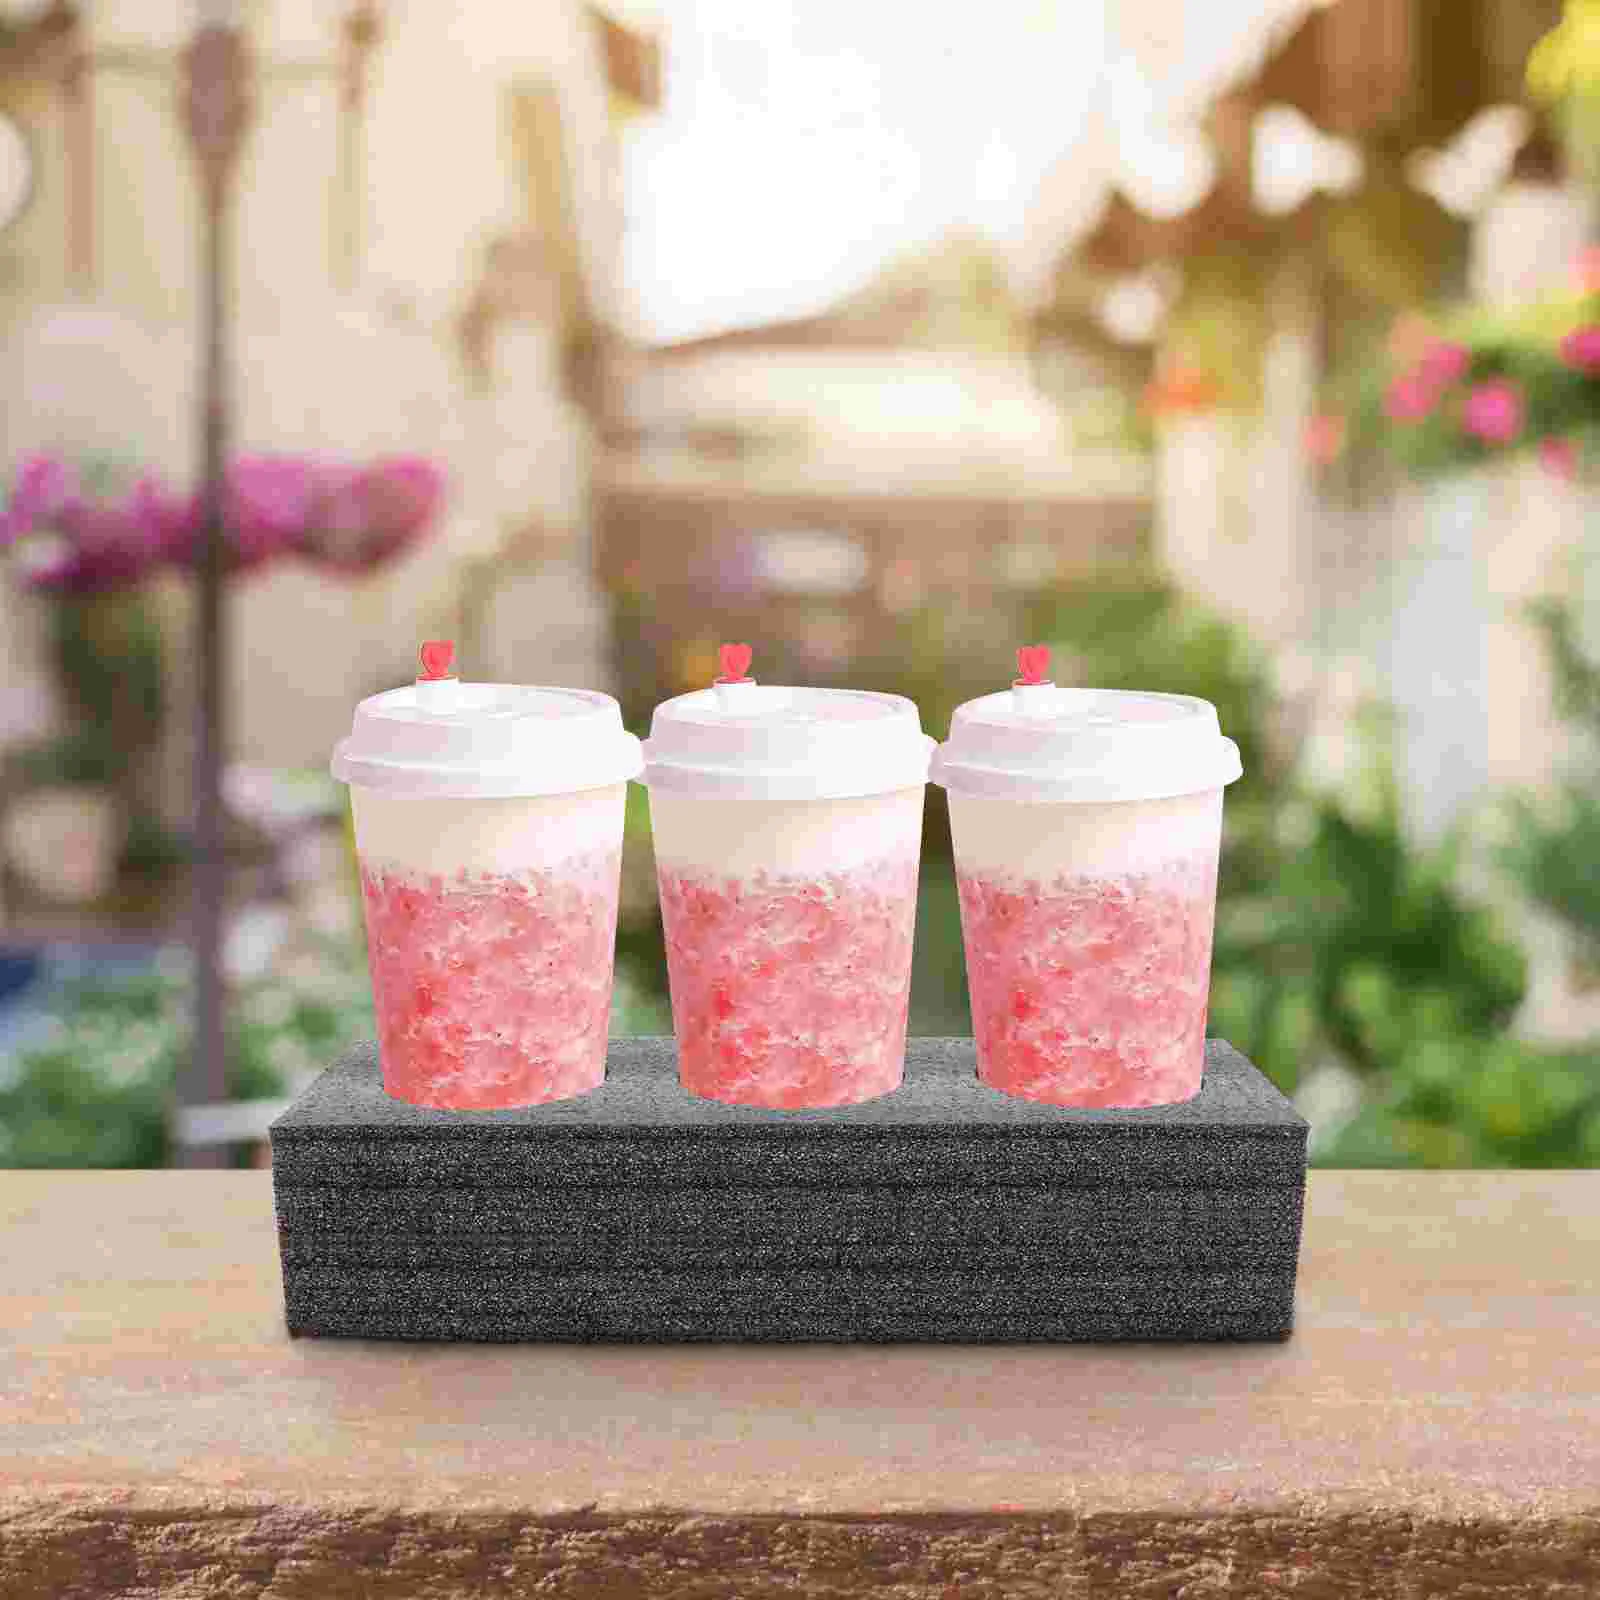 MT Products Small Paper Food Tray with Drink Carrier - 2 Cup Carriers for  Drinks - Paper Cup Holder and Tray for Hot or Cold Drinks and Food - (25